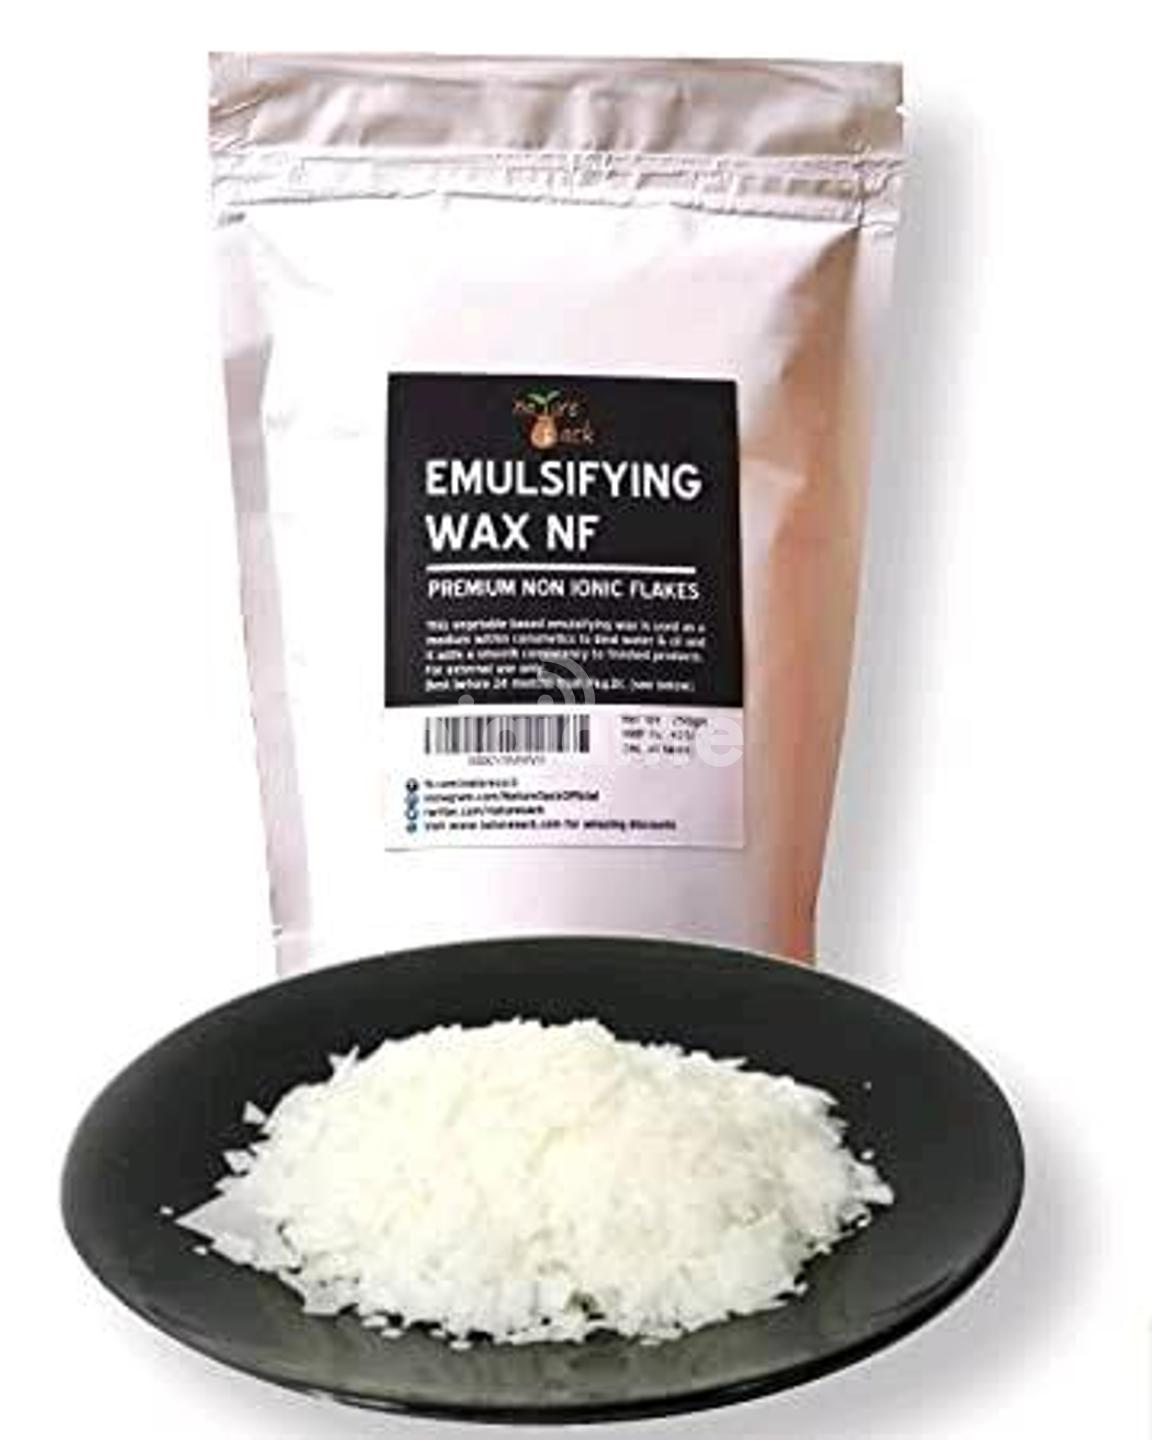 Polawax - Emulsifying Wax NF > Emulsifiers-Complete for Creams